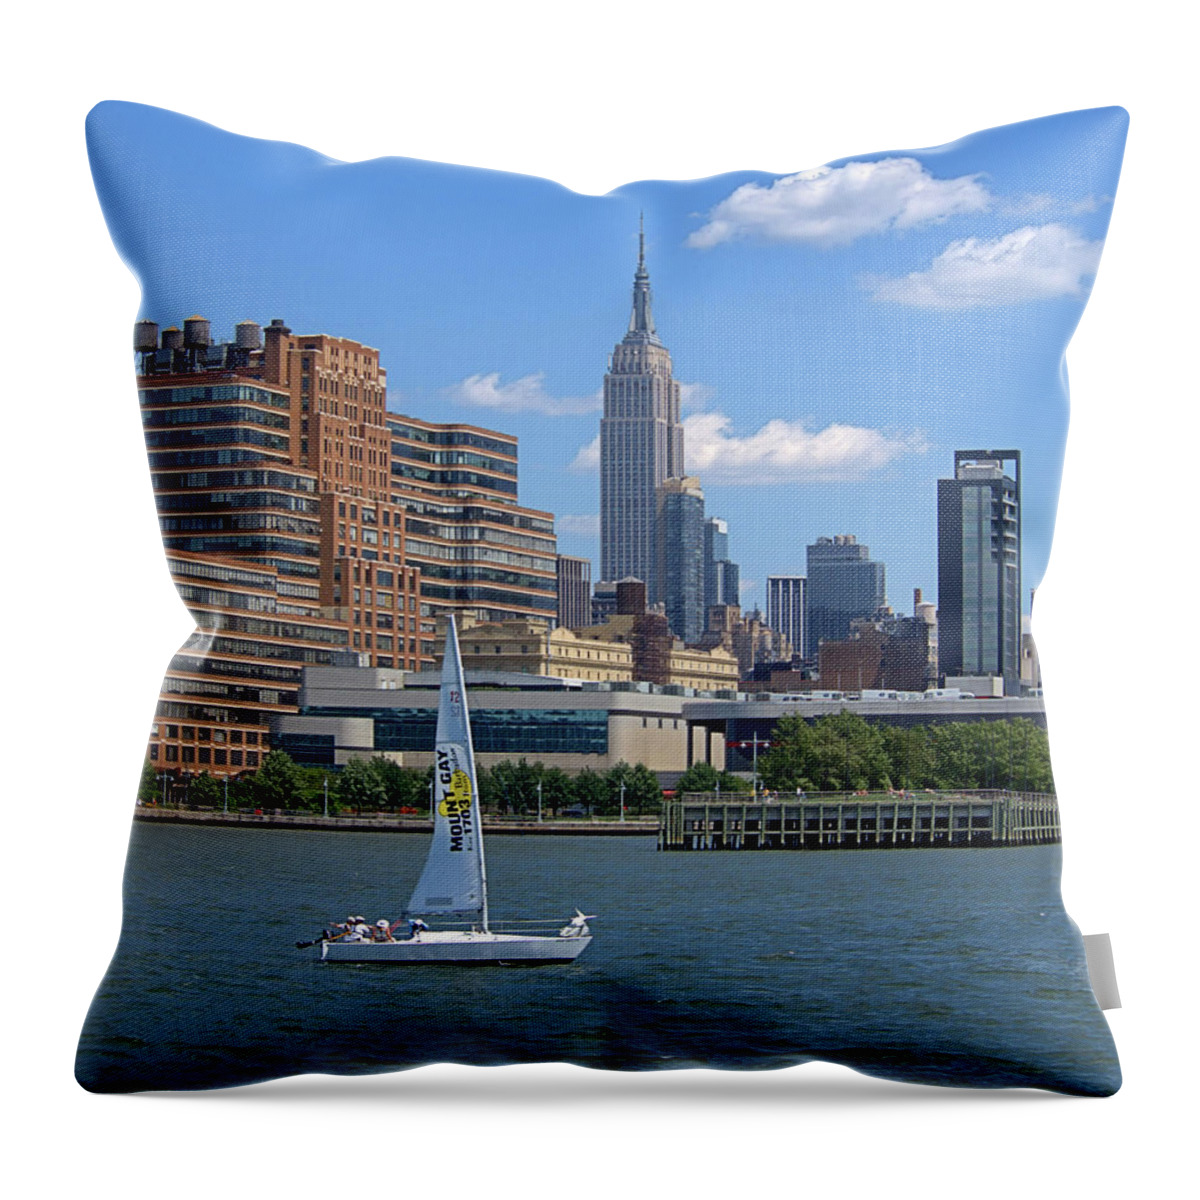 Empire State Building Throw Pillow featuring the photograph Empire State I I I by Newwwman